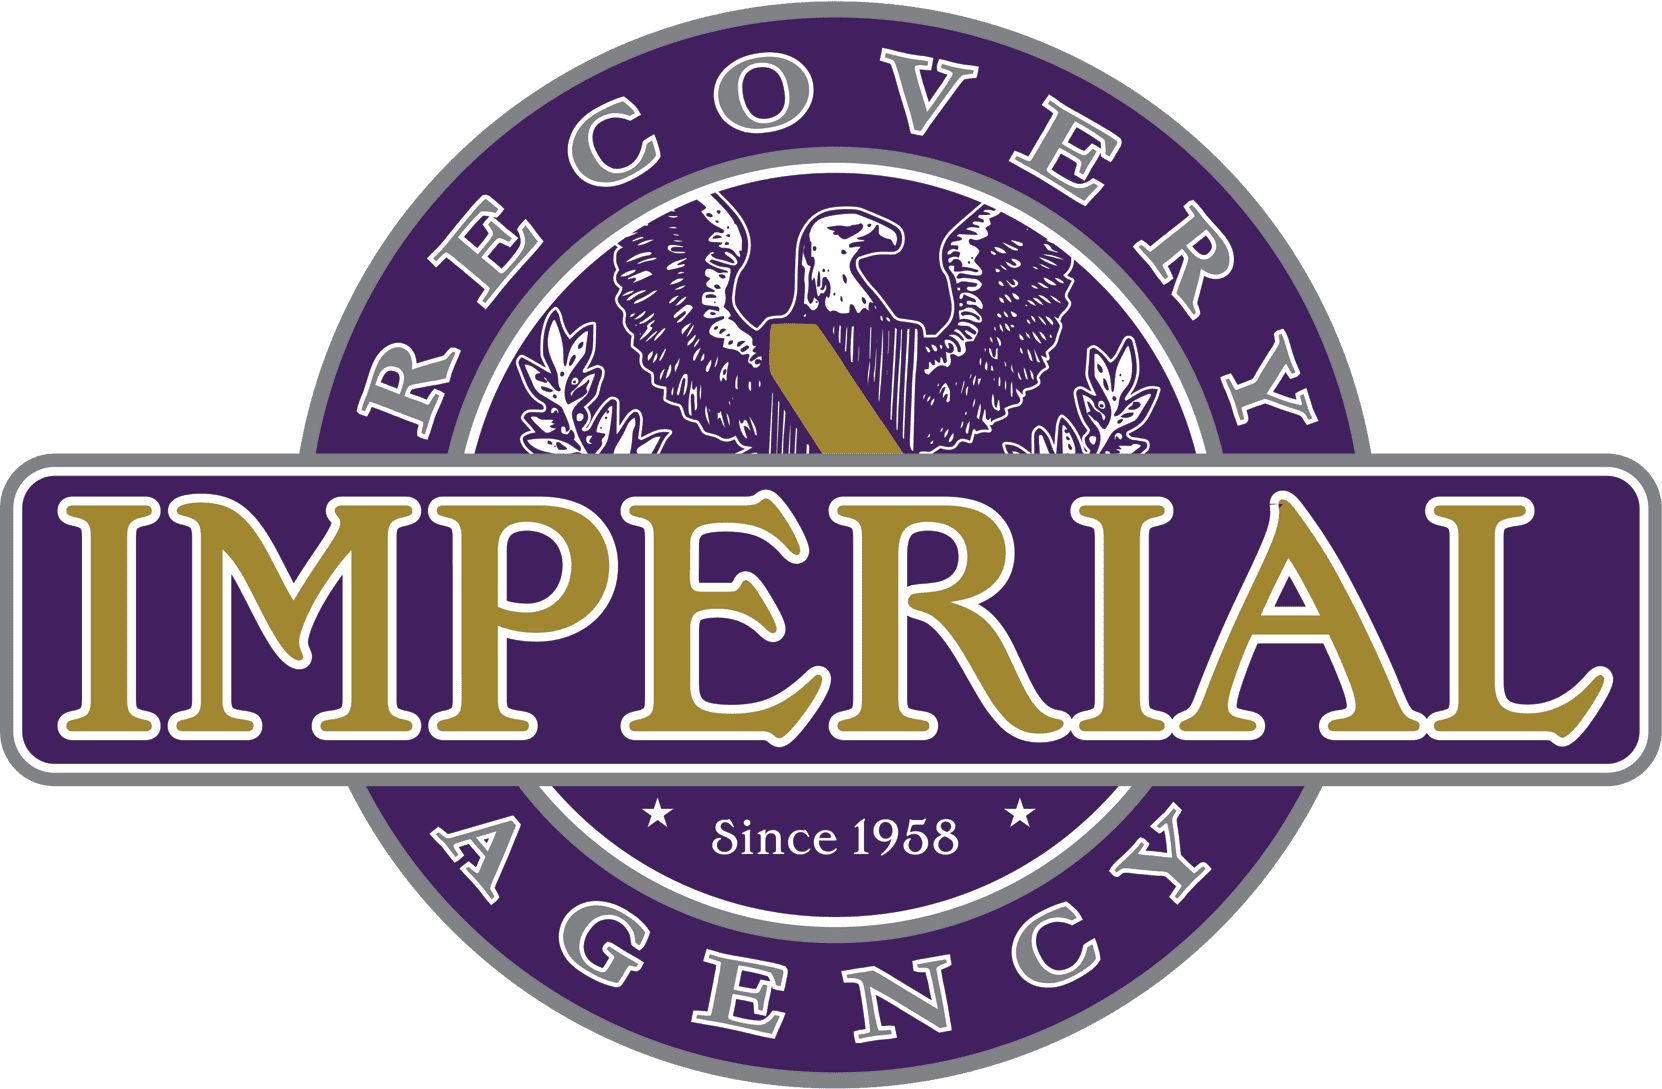 Imperial Recovery & Towing